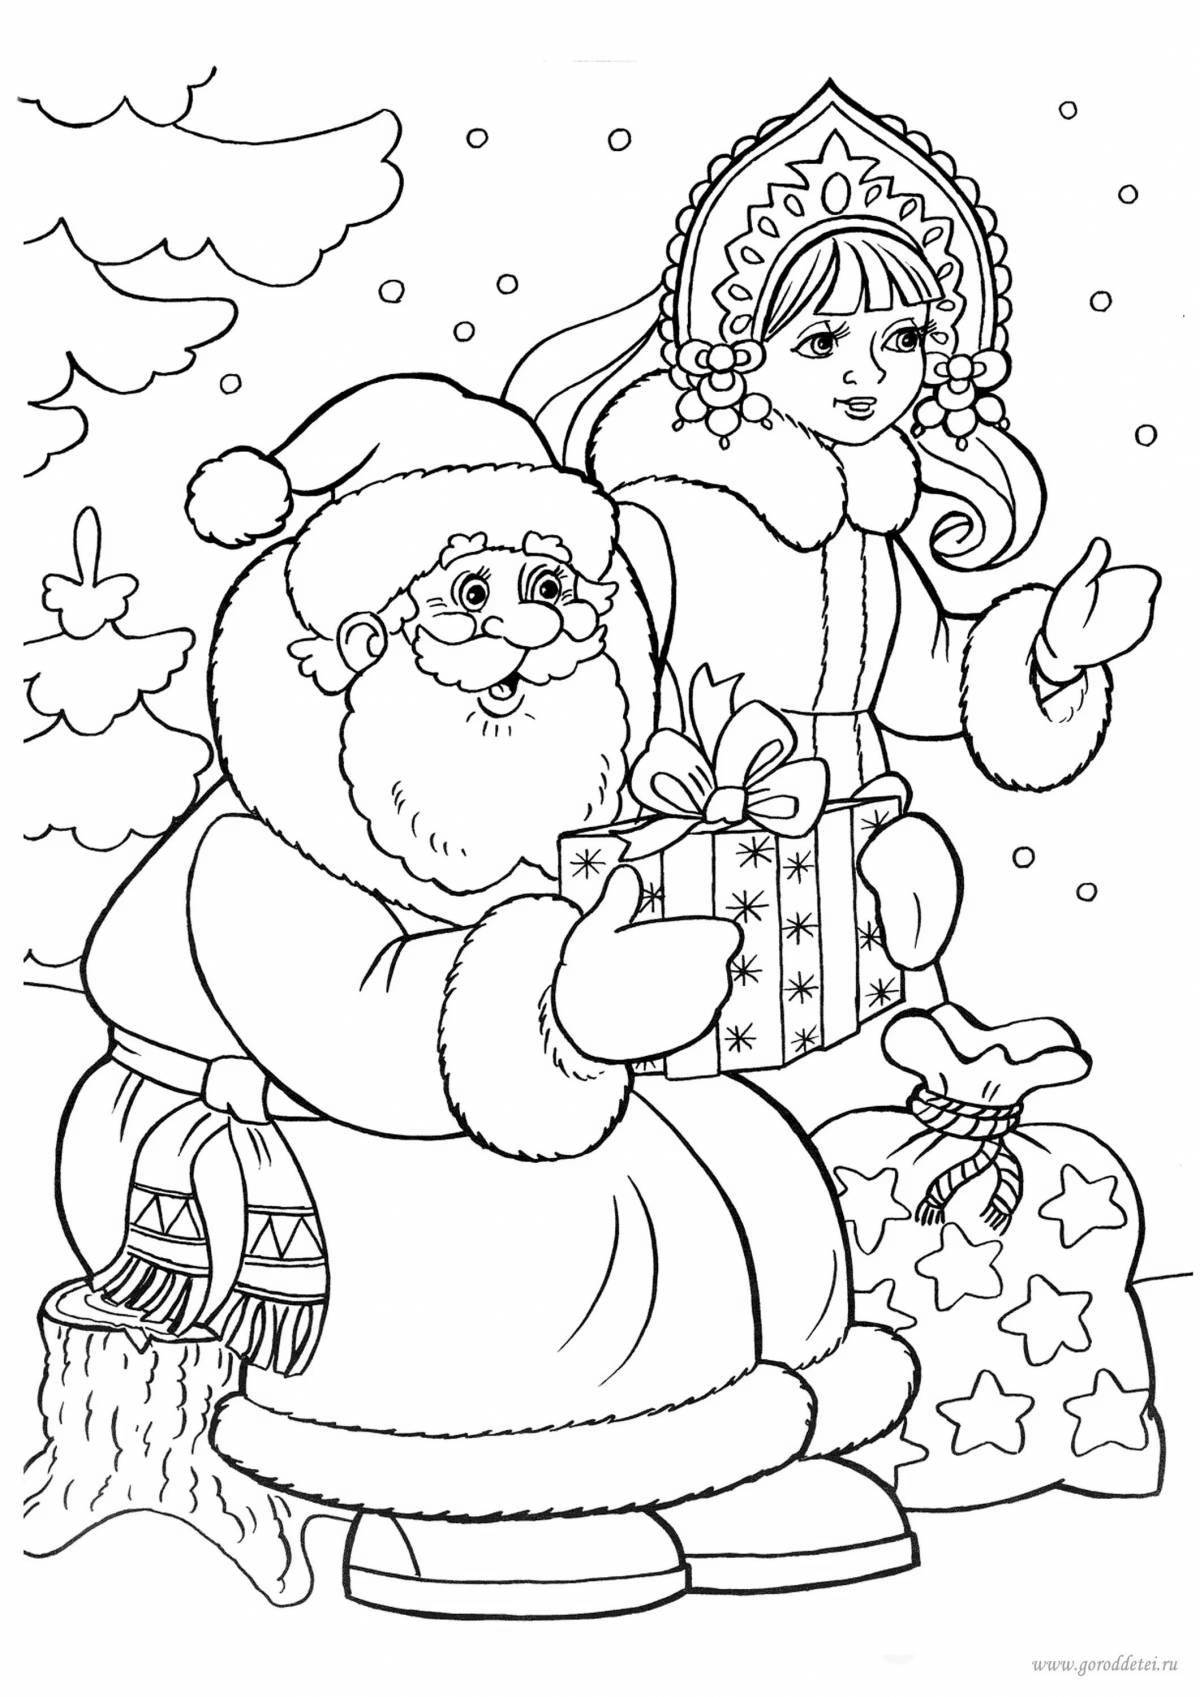 Exquisite Christmas coloring book